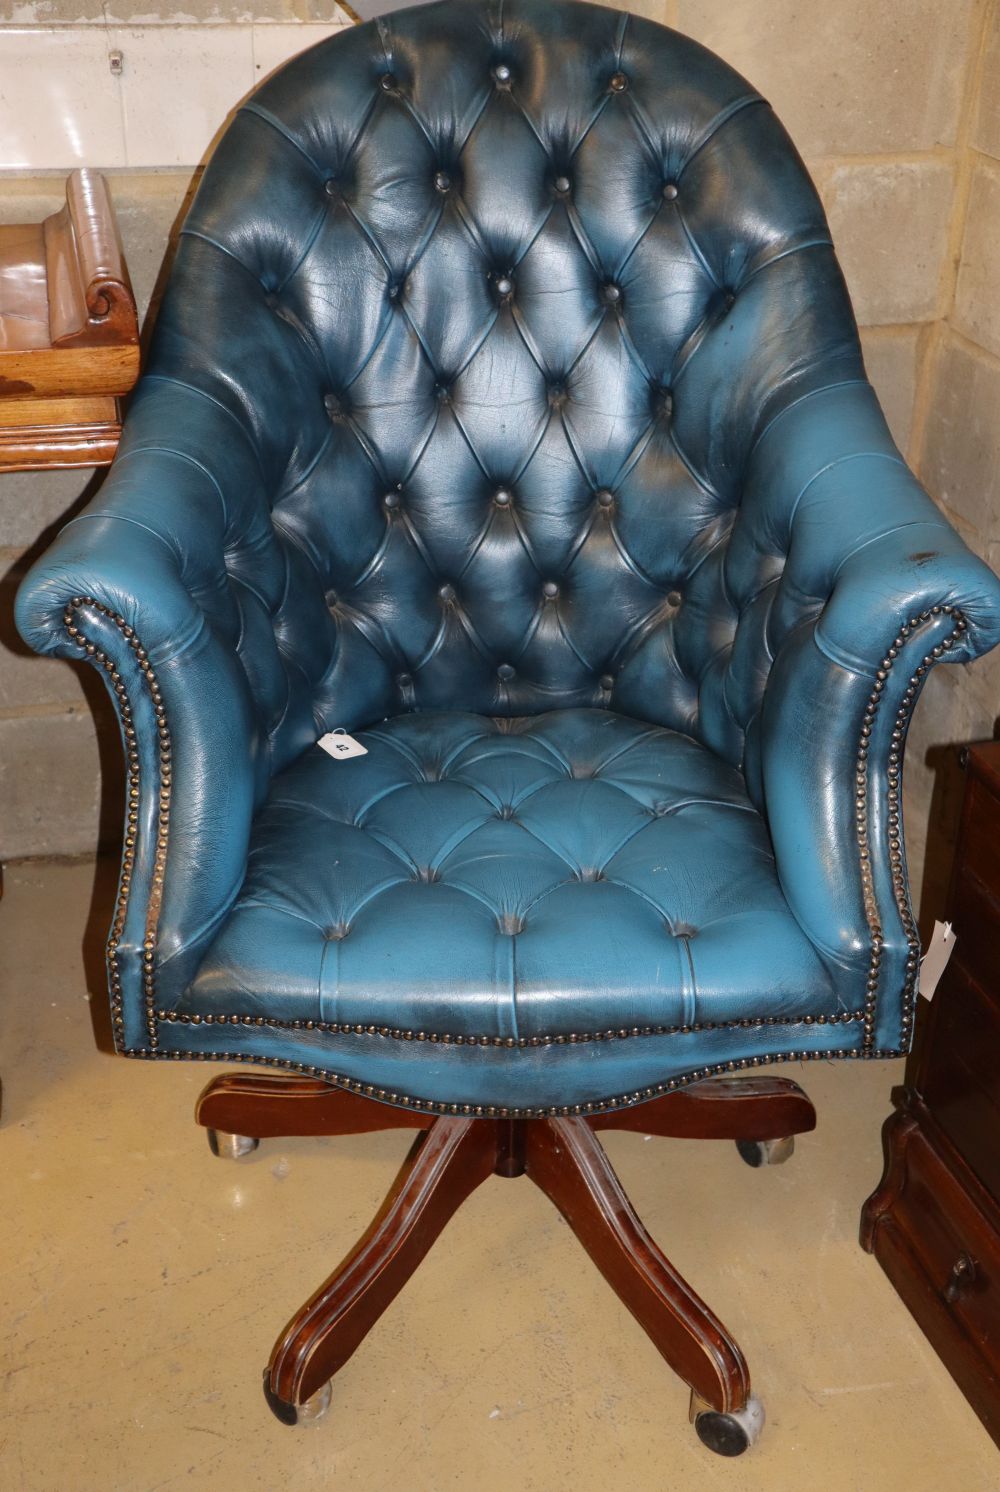 A buttoned blue leather upholstered swivel desk chair